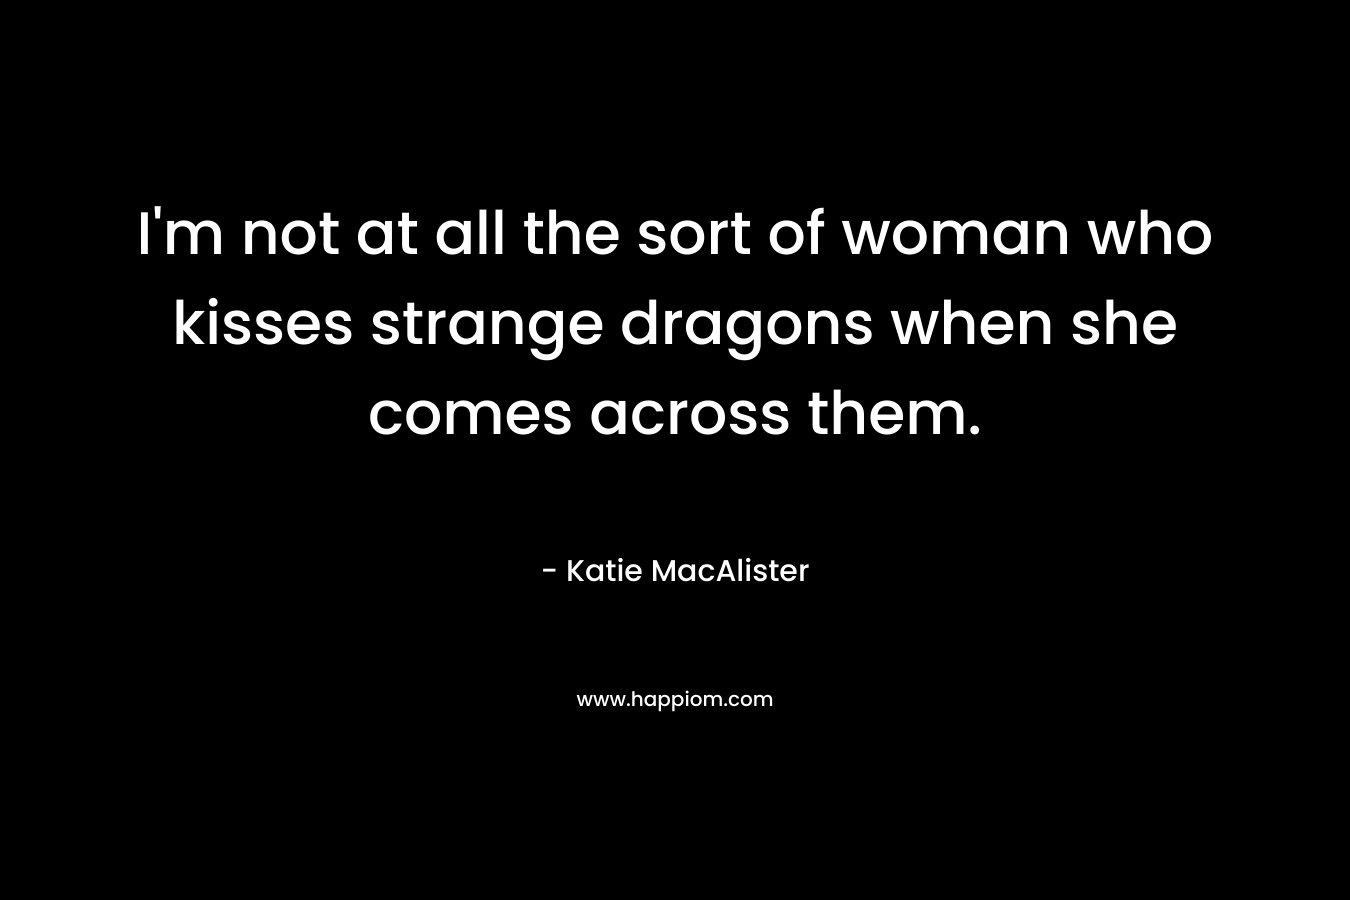 I’m not at all the sort of woman who kisses strange dragons when she comes across them. – Katie MacAlister